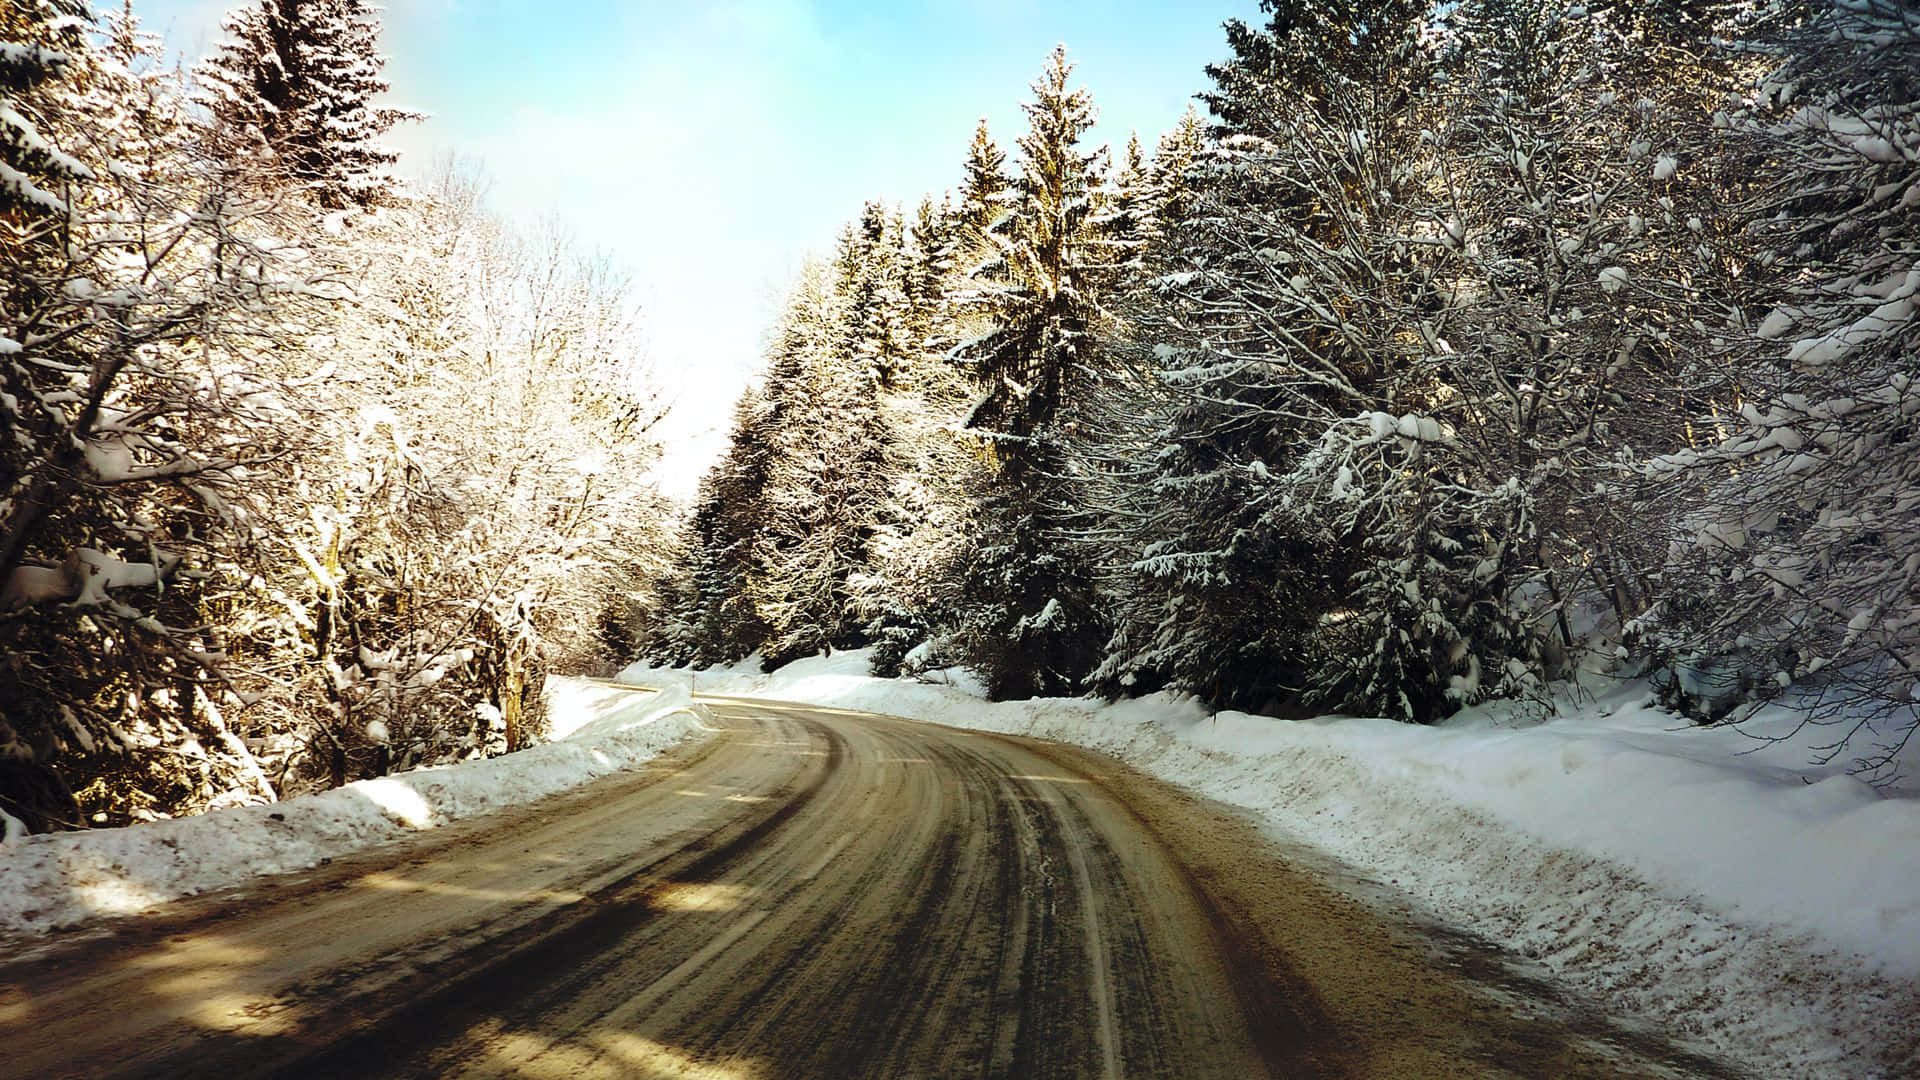 Icy Road Surrounded by Snow-Covered Trees Wallpaper